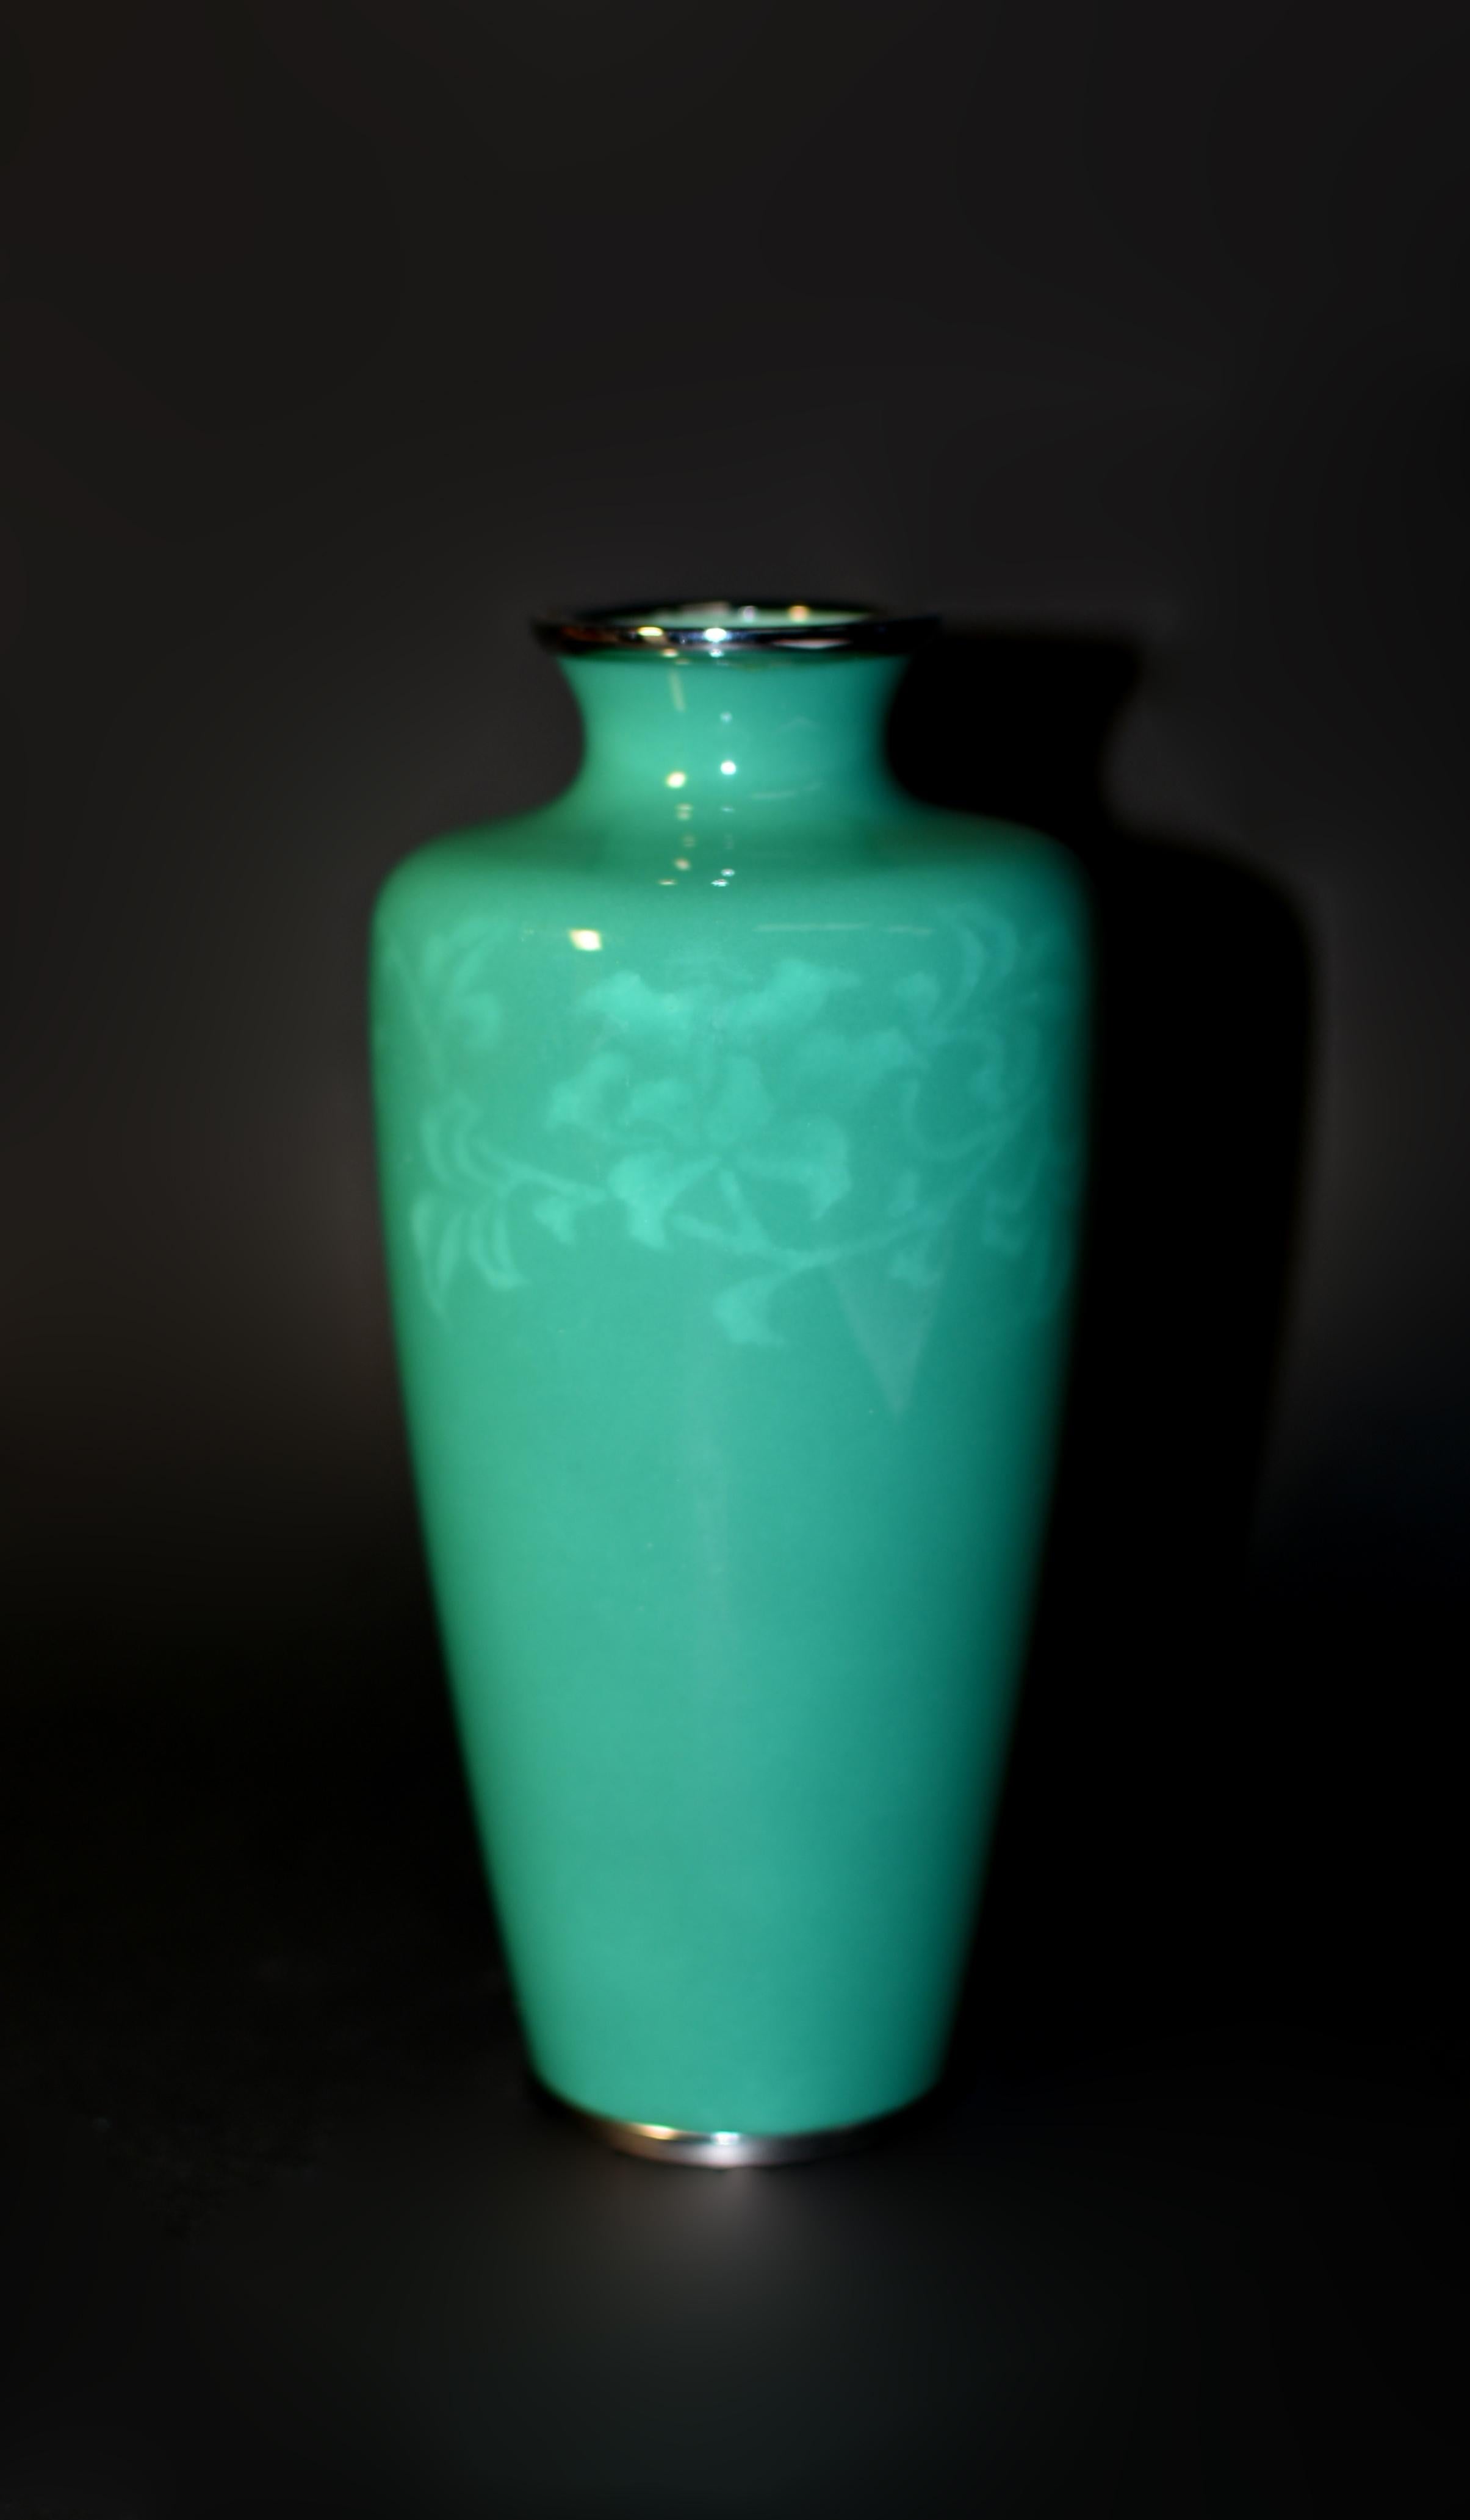 A masterpiece of Ando Jubei wireless cloisonné vase. In his signature green enamel, portraying an intricate arabesque design of a blooming clematis vine under the glaze. By removing wires that would otherwise hold the enamel before firing, Ando